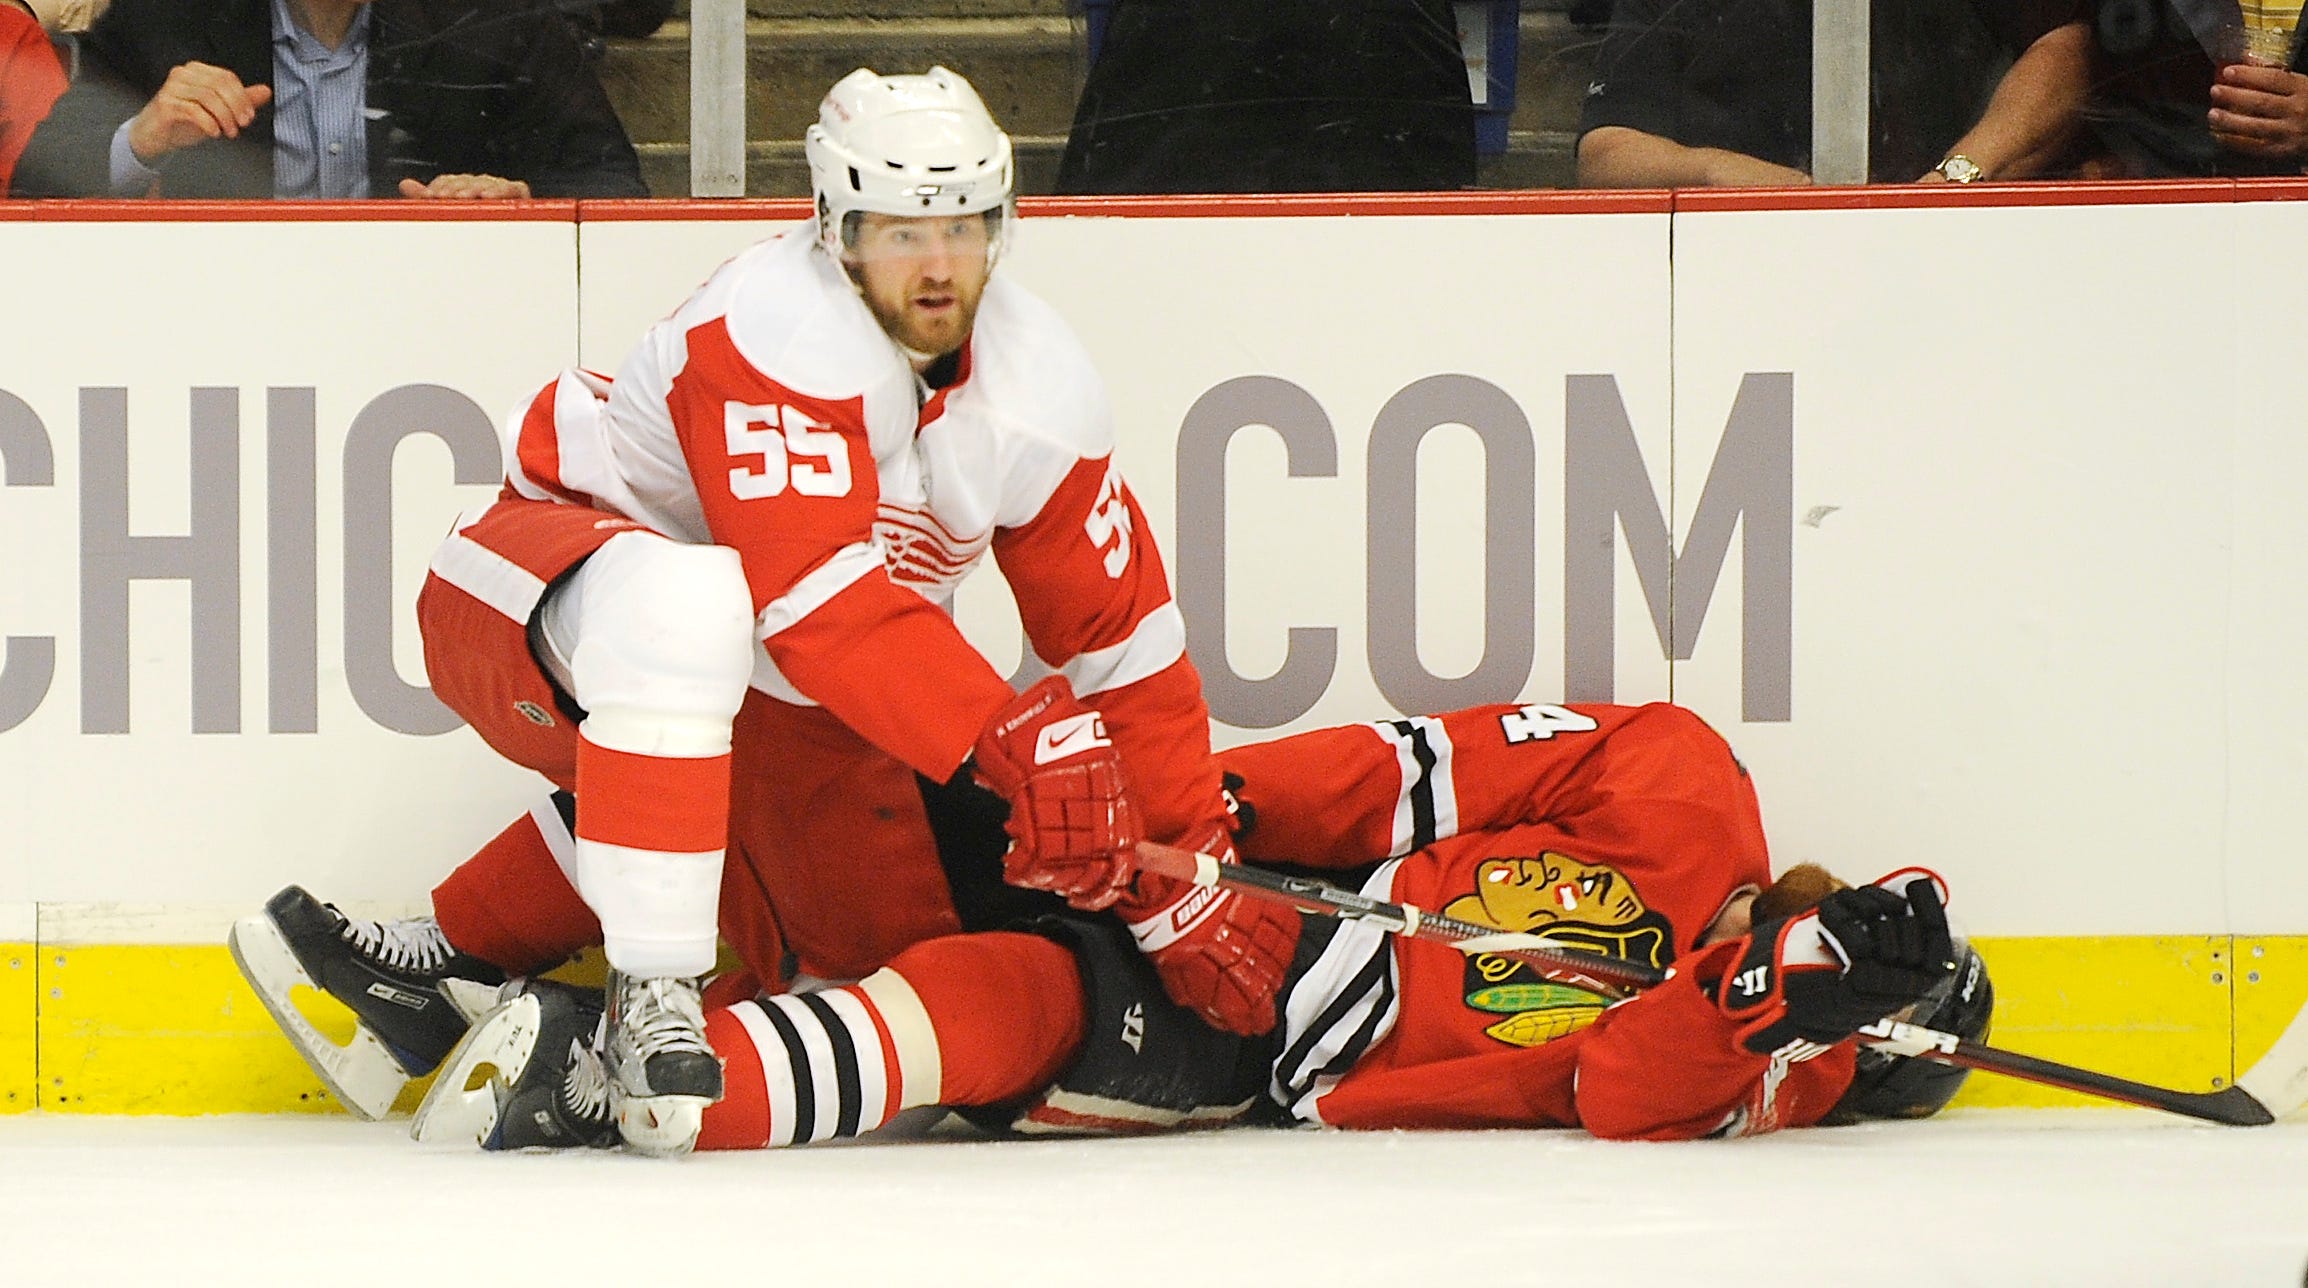 Detroit Red Wings defenseman Niklas Kronwall (55) kneels over Chicago Blackhawks right wing Martin Havlat (24) after knocking him flat with a check in the first period of a playoff game at the United Center in Chicago on May 22,  2009.